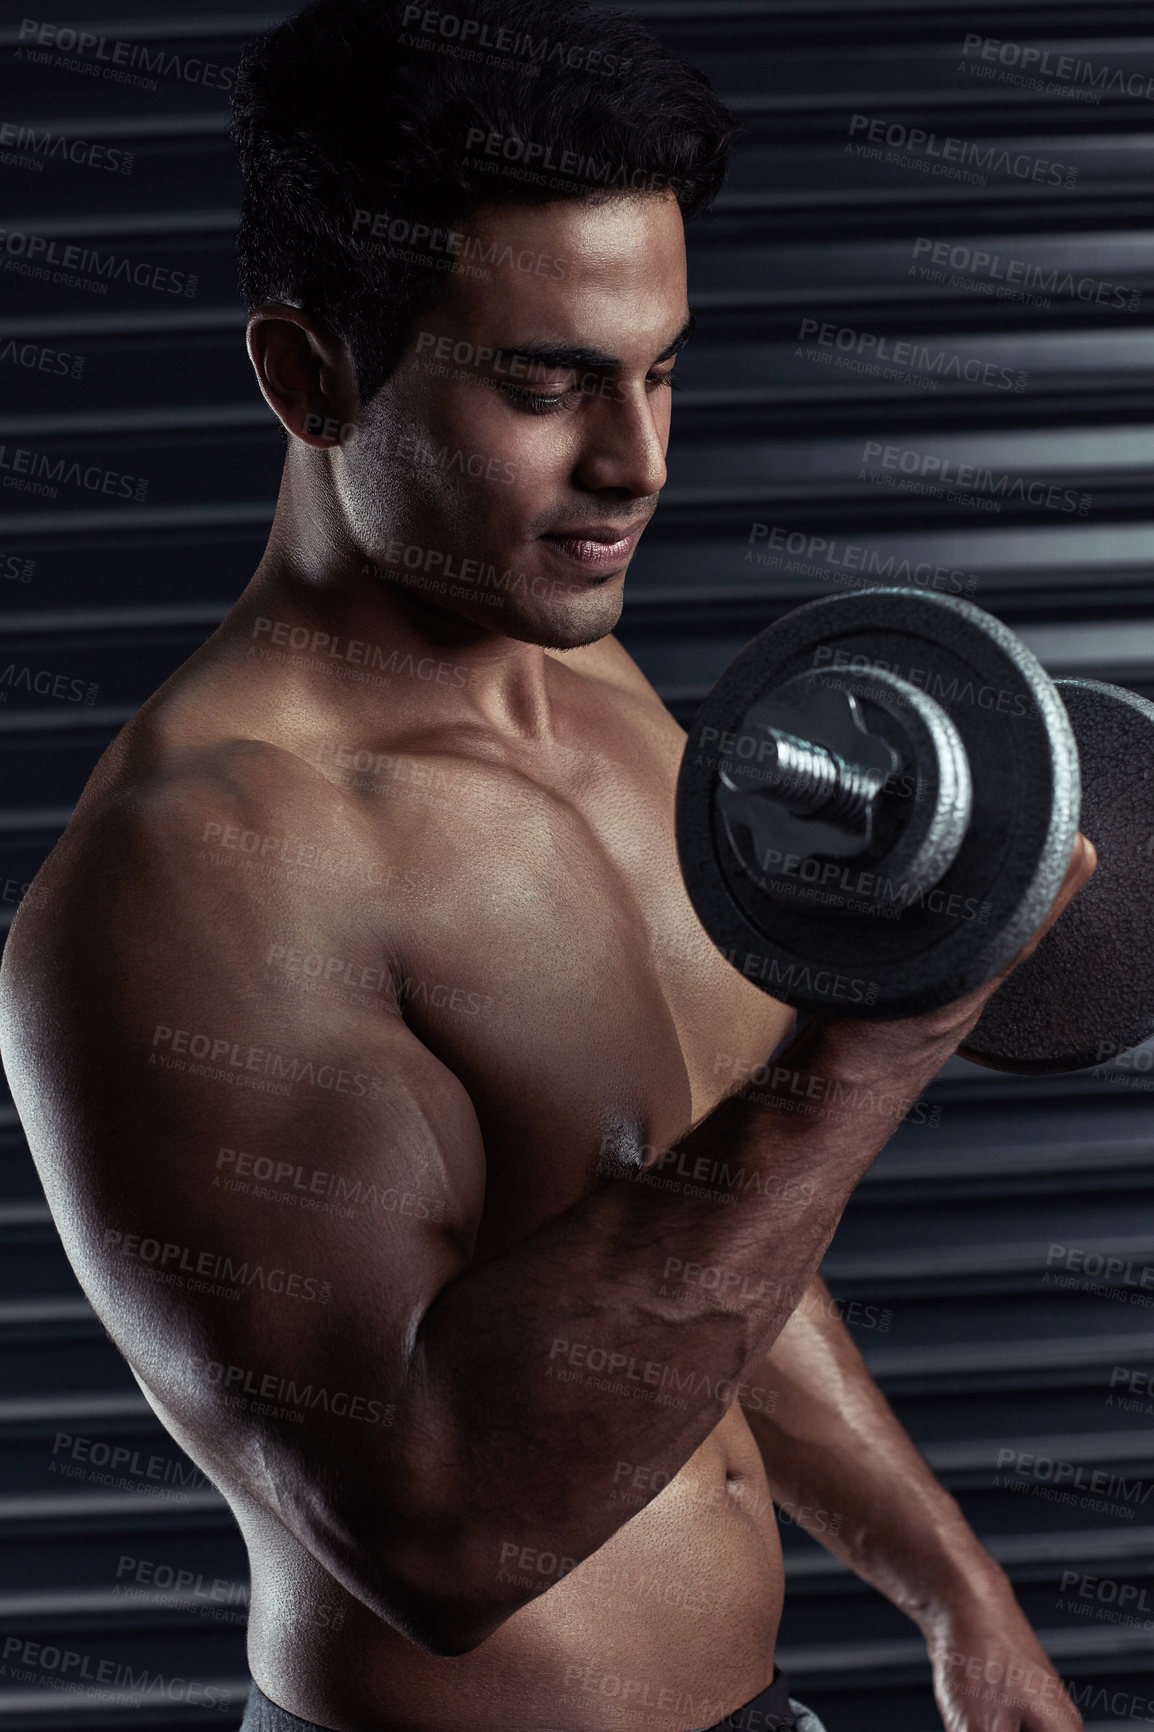 Buy stock photo Cropped shot of an athletic young man working out with a dumbbell